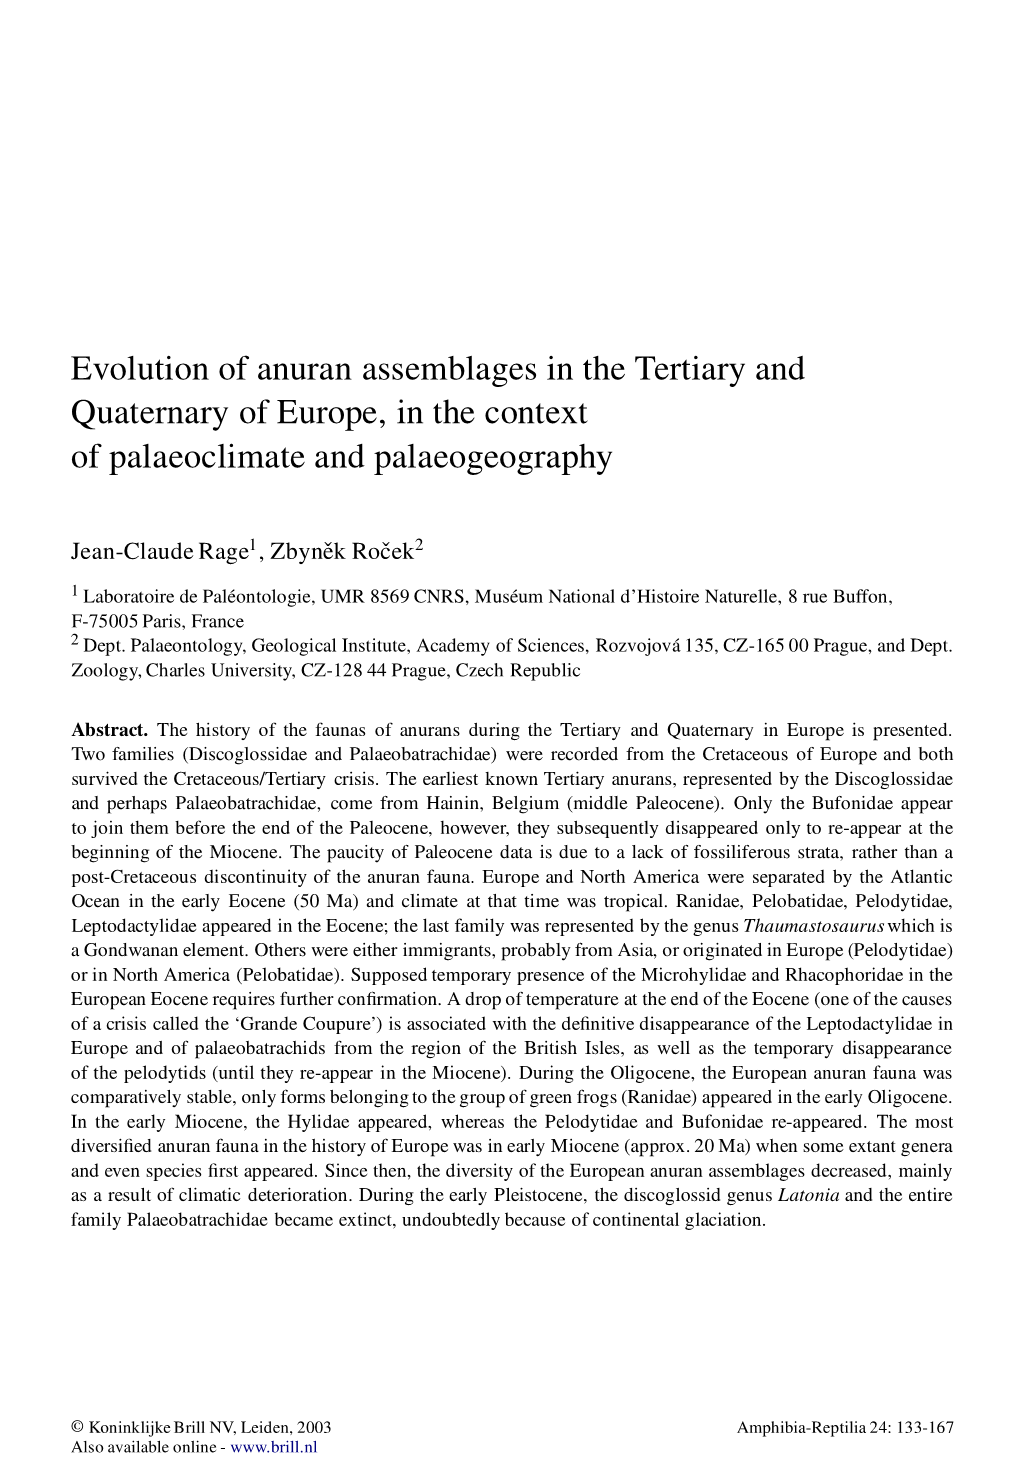 Evolution of Anuran Assemblages in the Tertiary and Quaternary Of